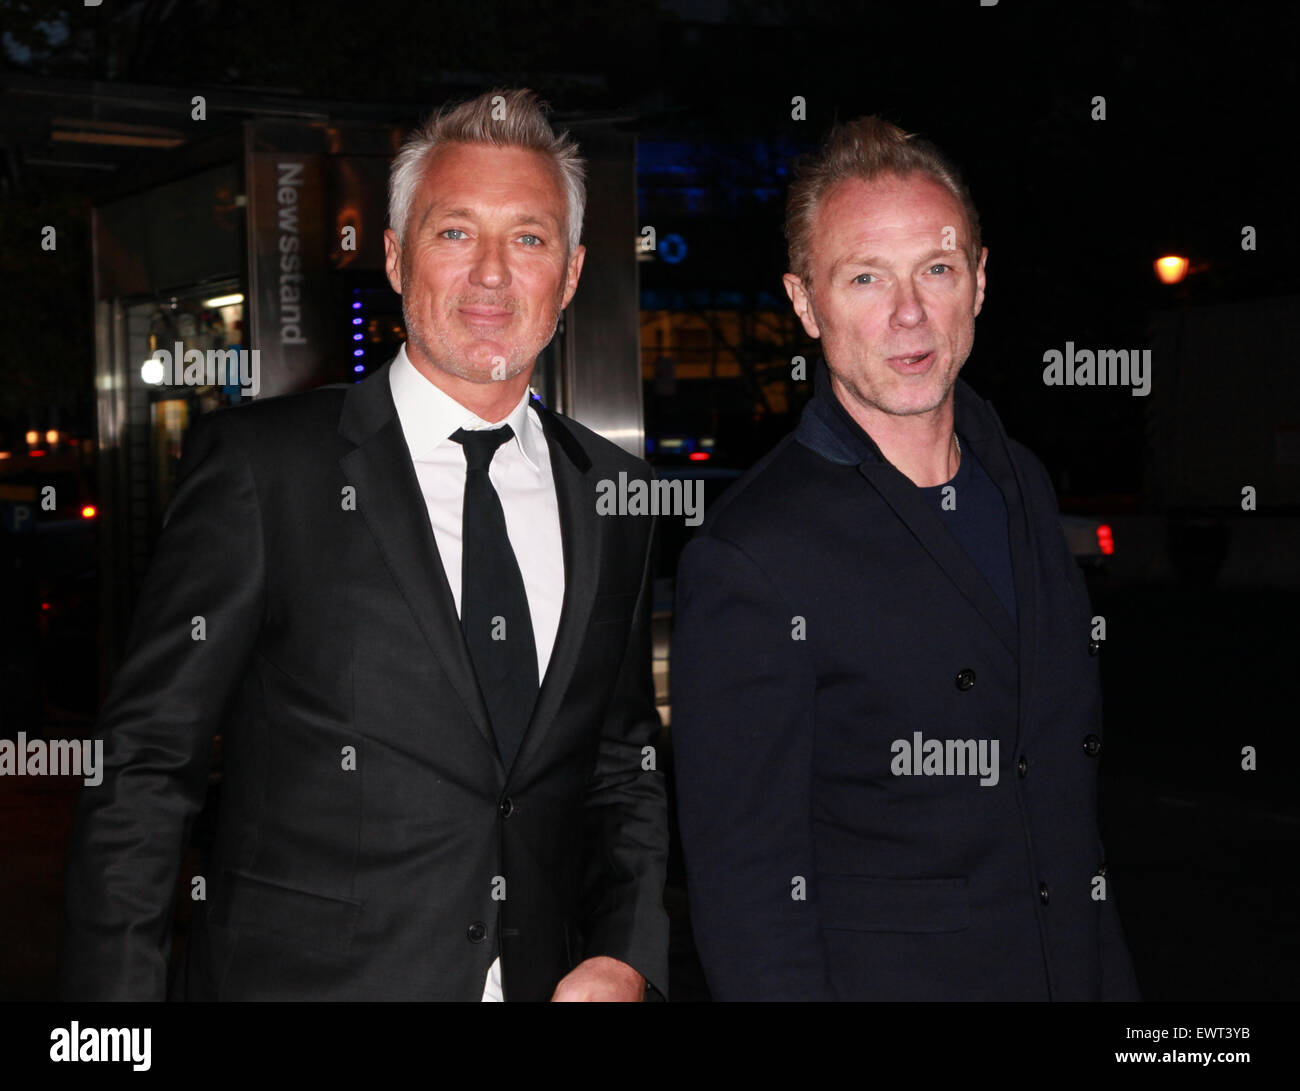 Premiere of Spandau Ballet's 'Soul Boys of the Western World' at the IFC Center  Featuring: Gary Kemp, Martin Kemp Where: New York, New York, United States When: 29 Apr 2015 Stock Photo